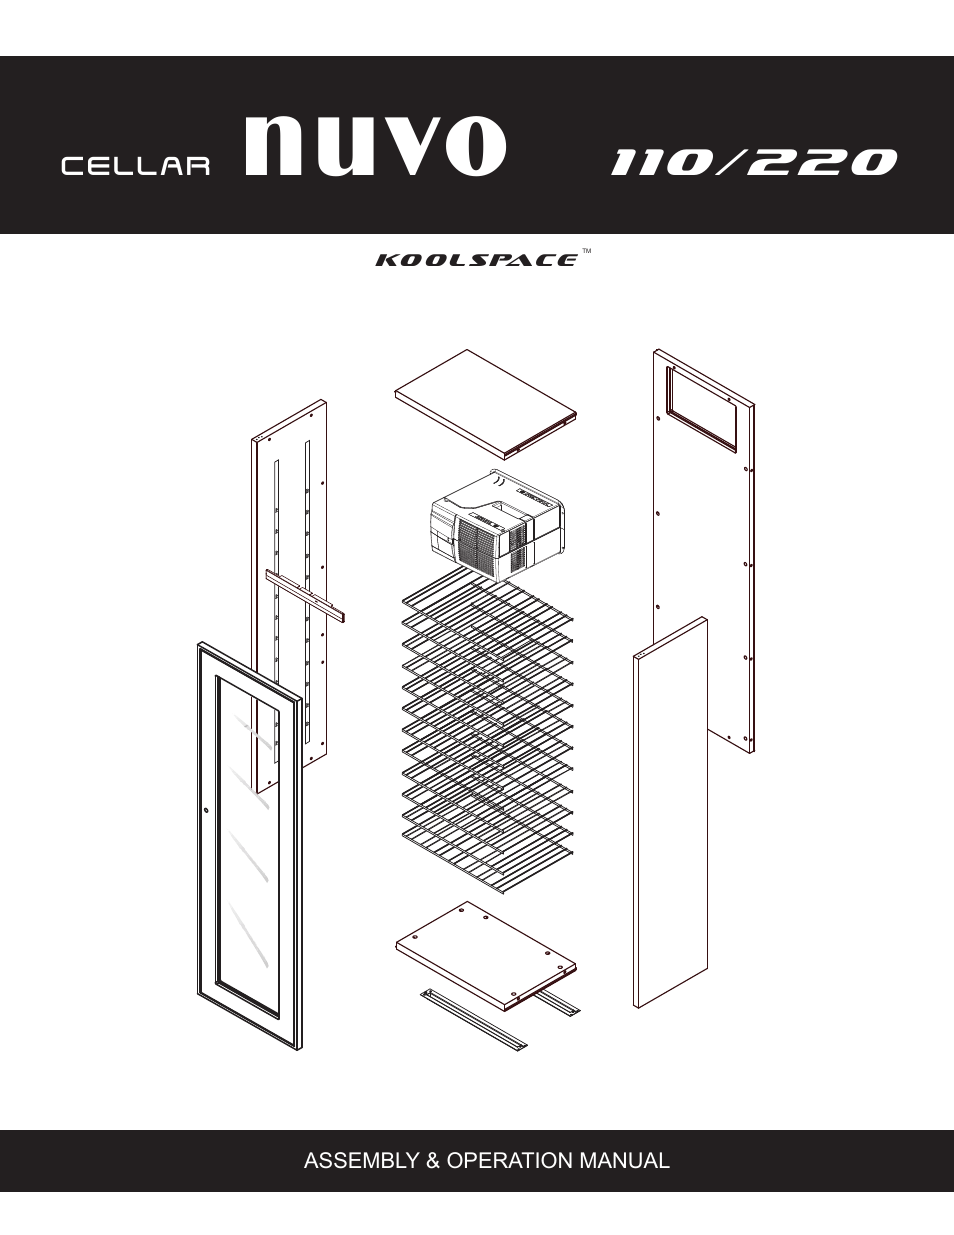 Nuvo 220 User Manual | 16 pages